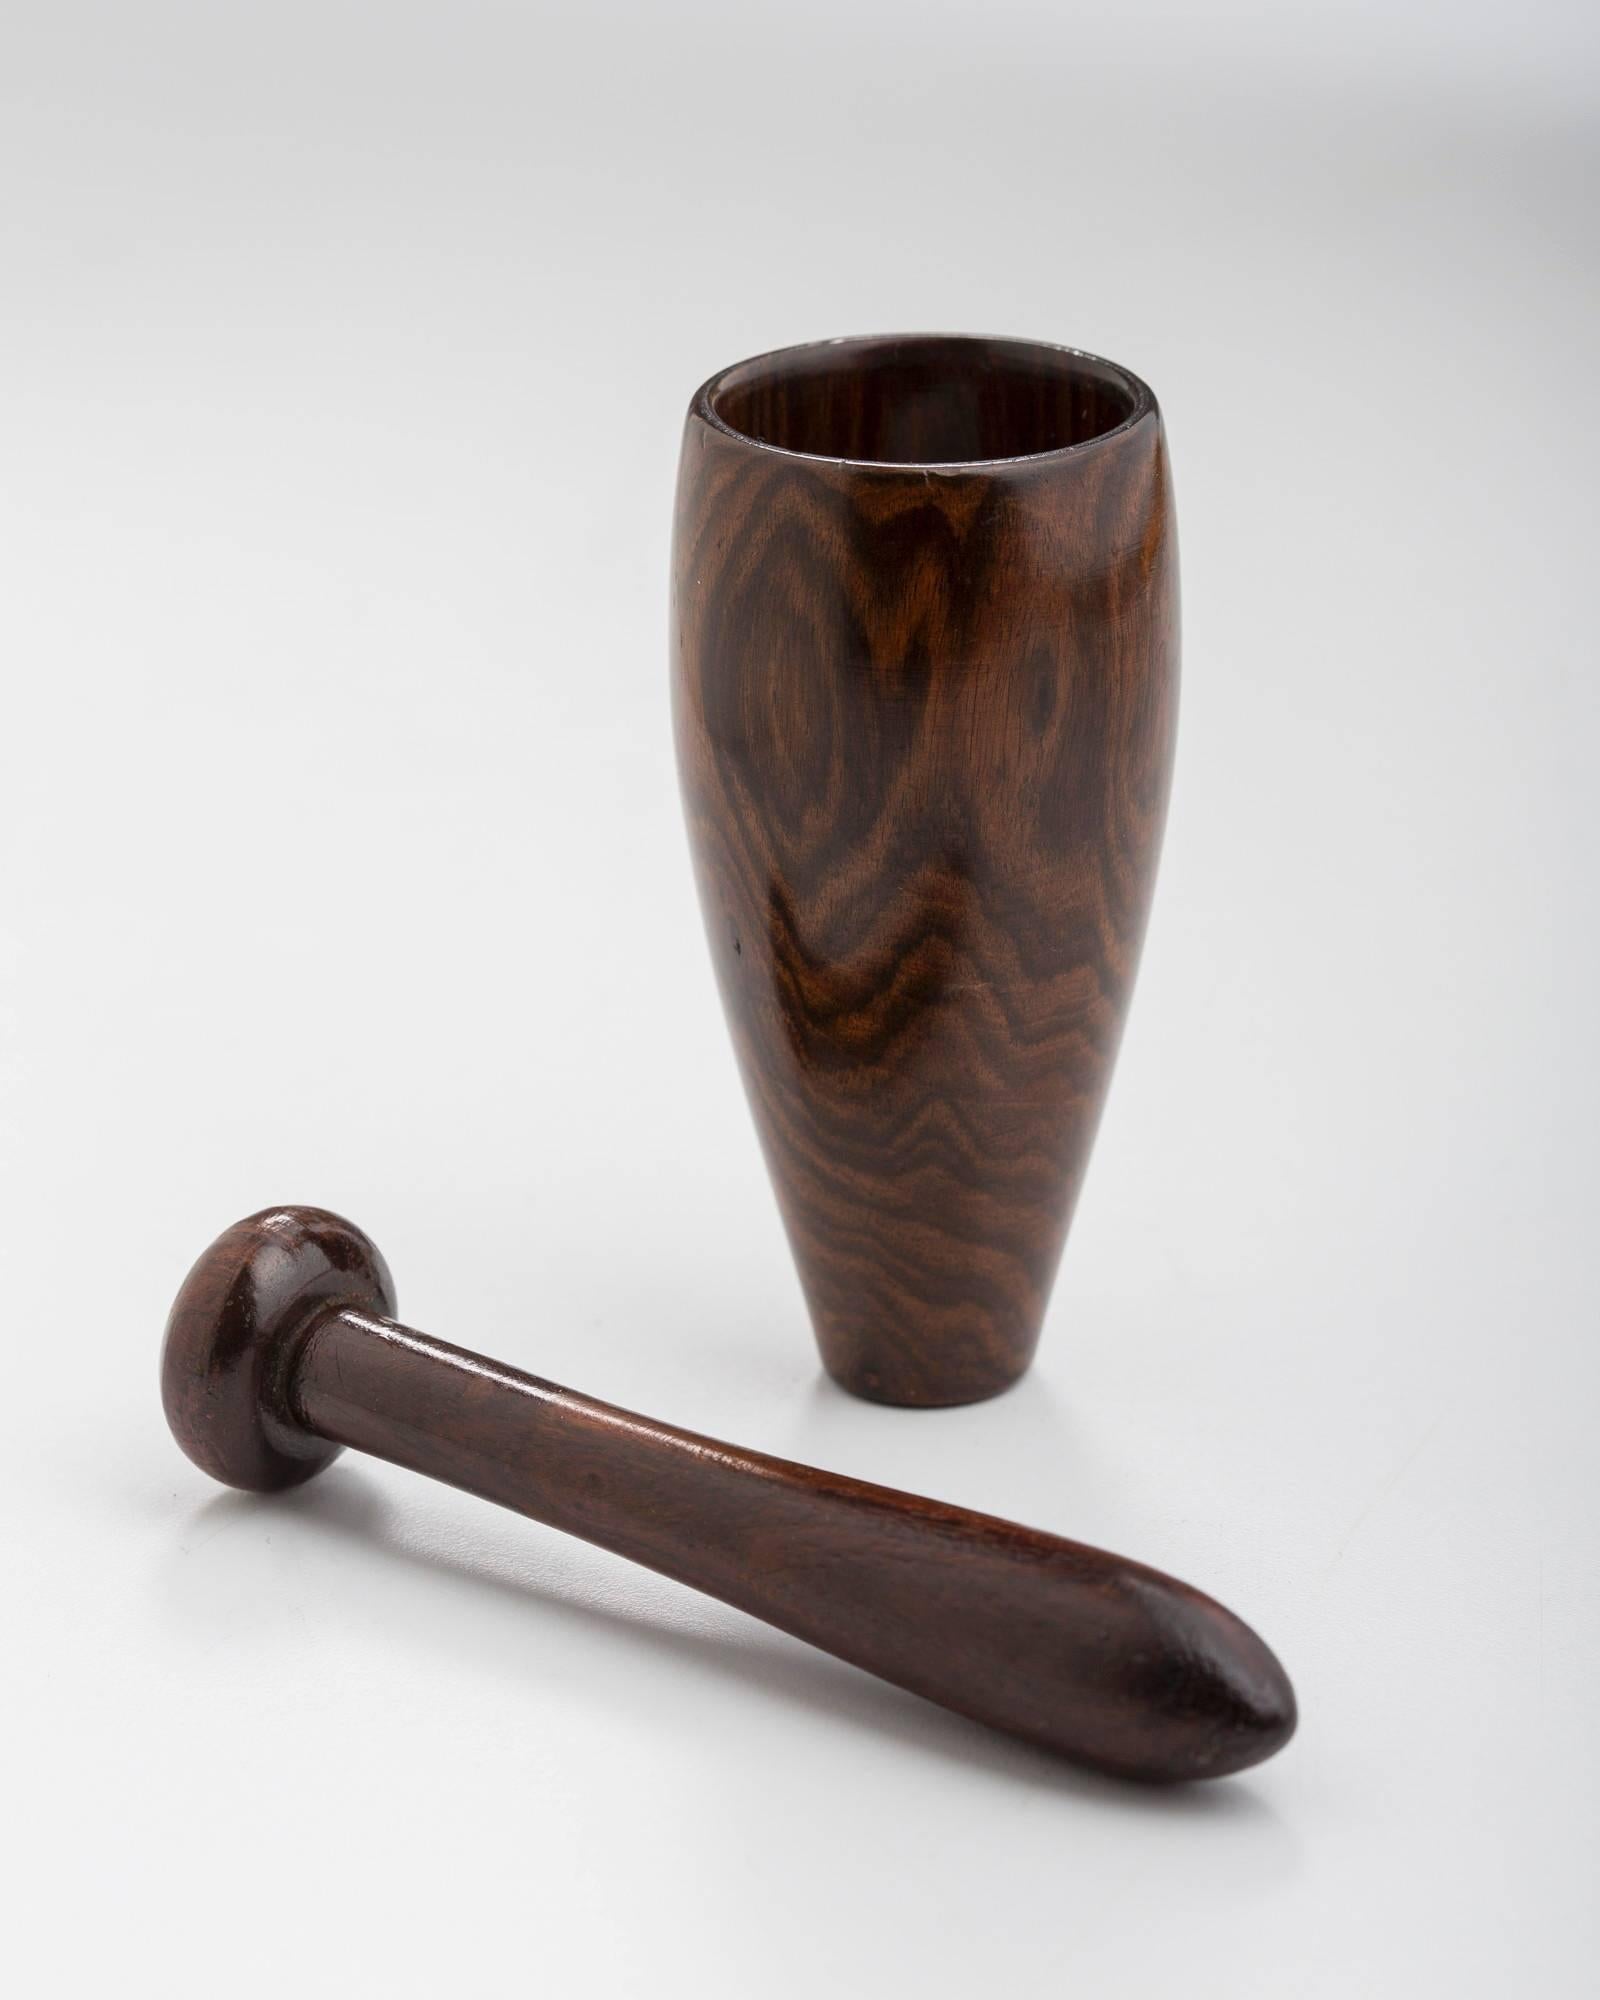 English, rosewood, mortar and pestle for snuff/ tobacco, circa 1820.
4.0